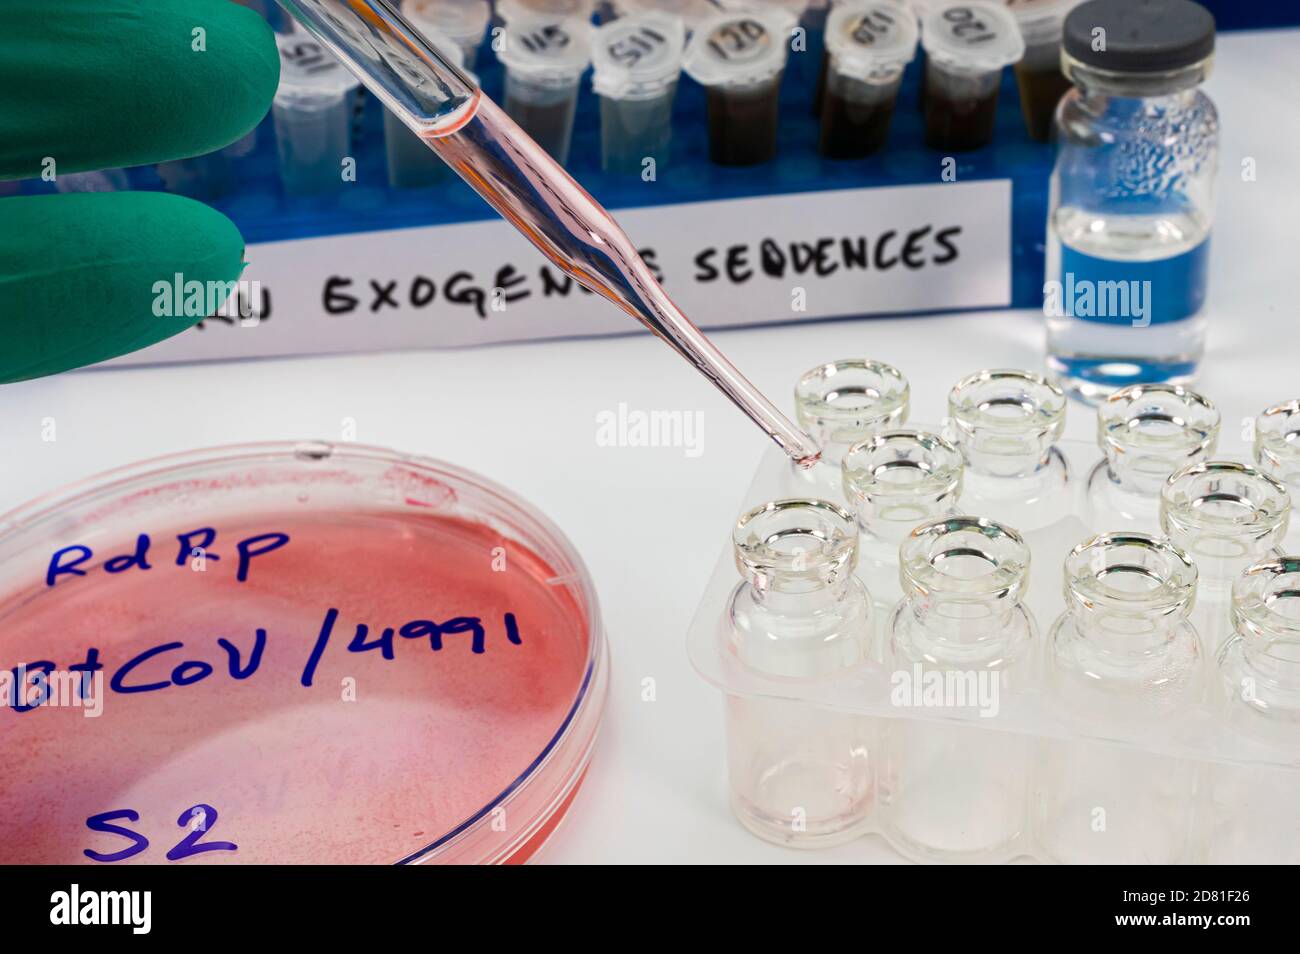 Virologist working on exogenous Sars-CoV-2 virus RNA sequence in the laboratory, conceptual image Stock Photo